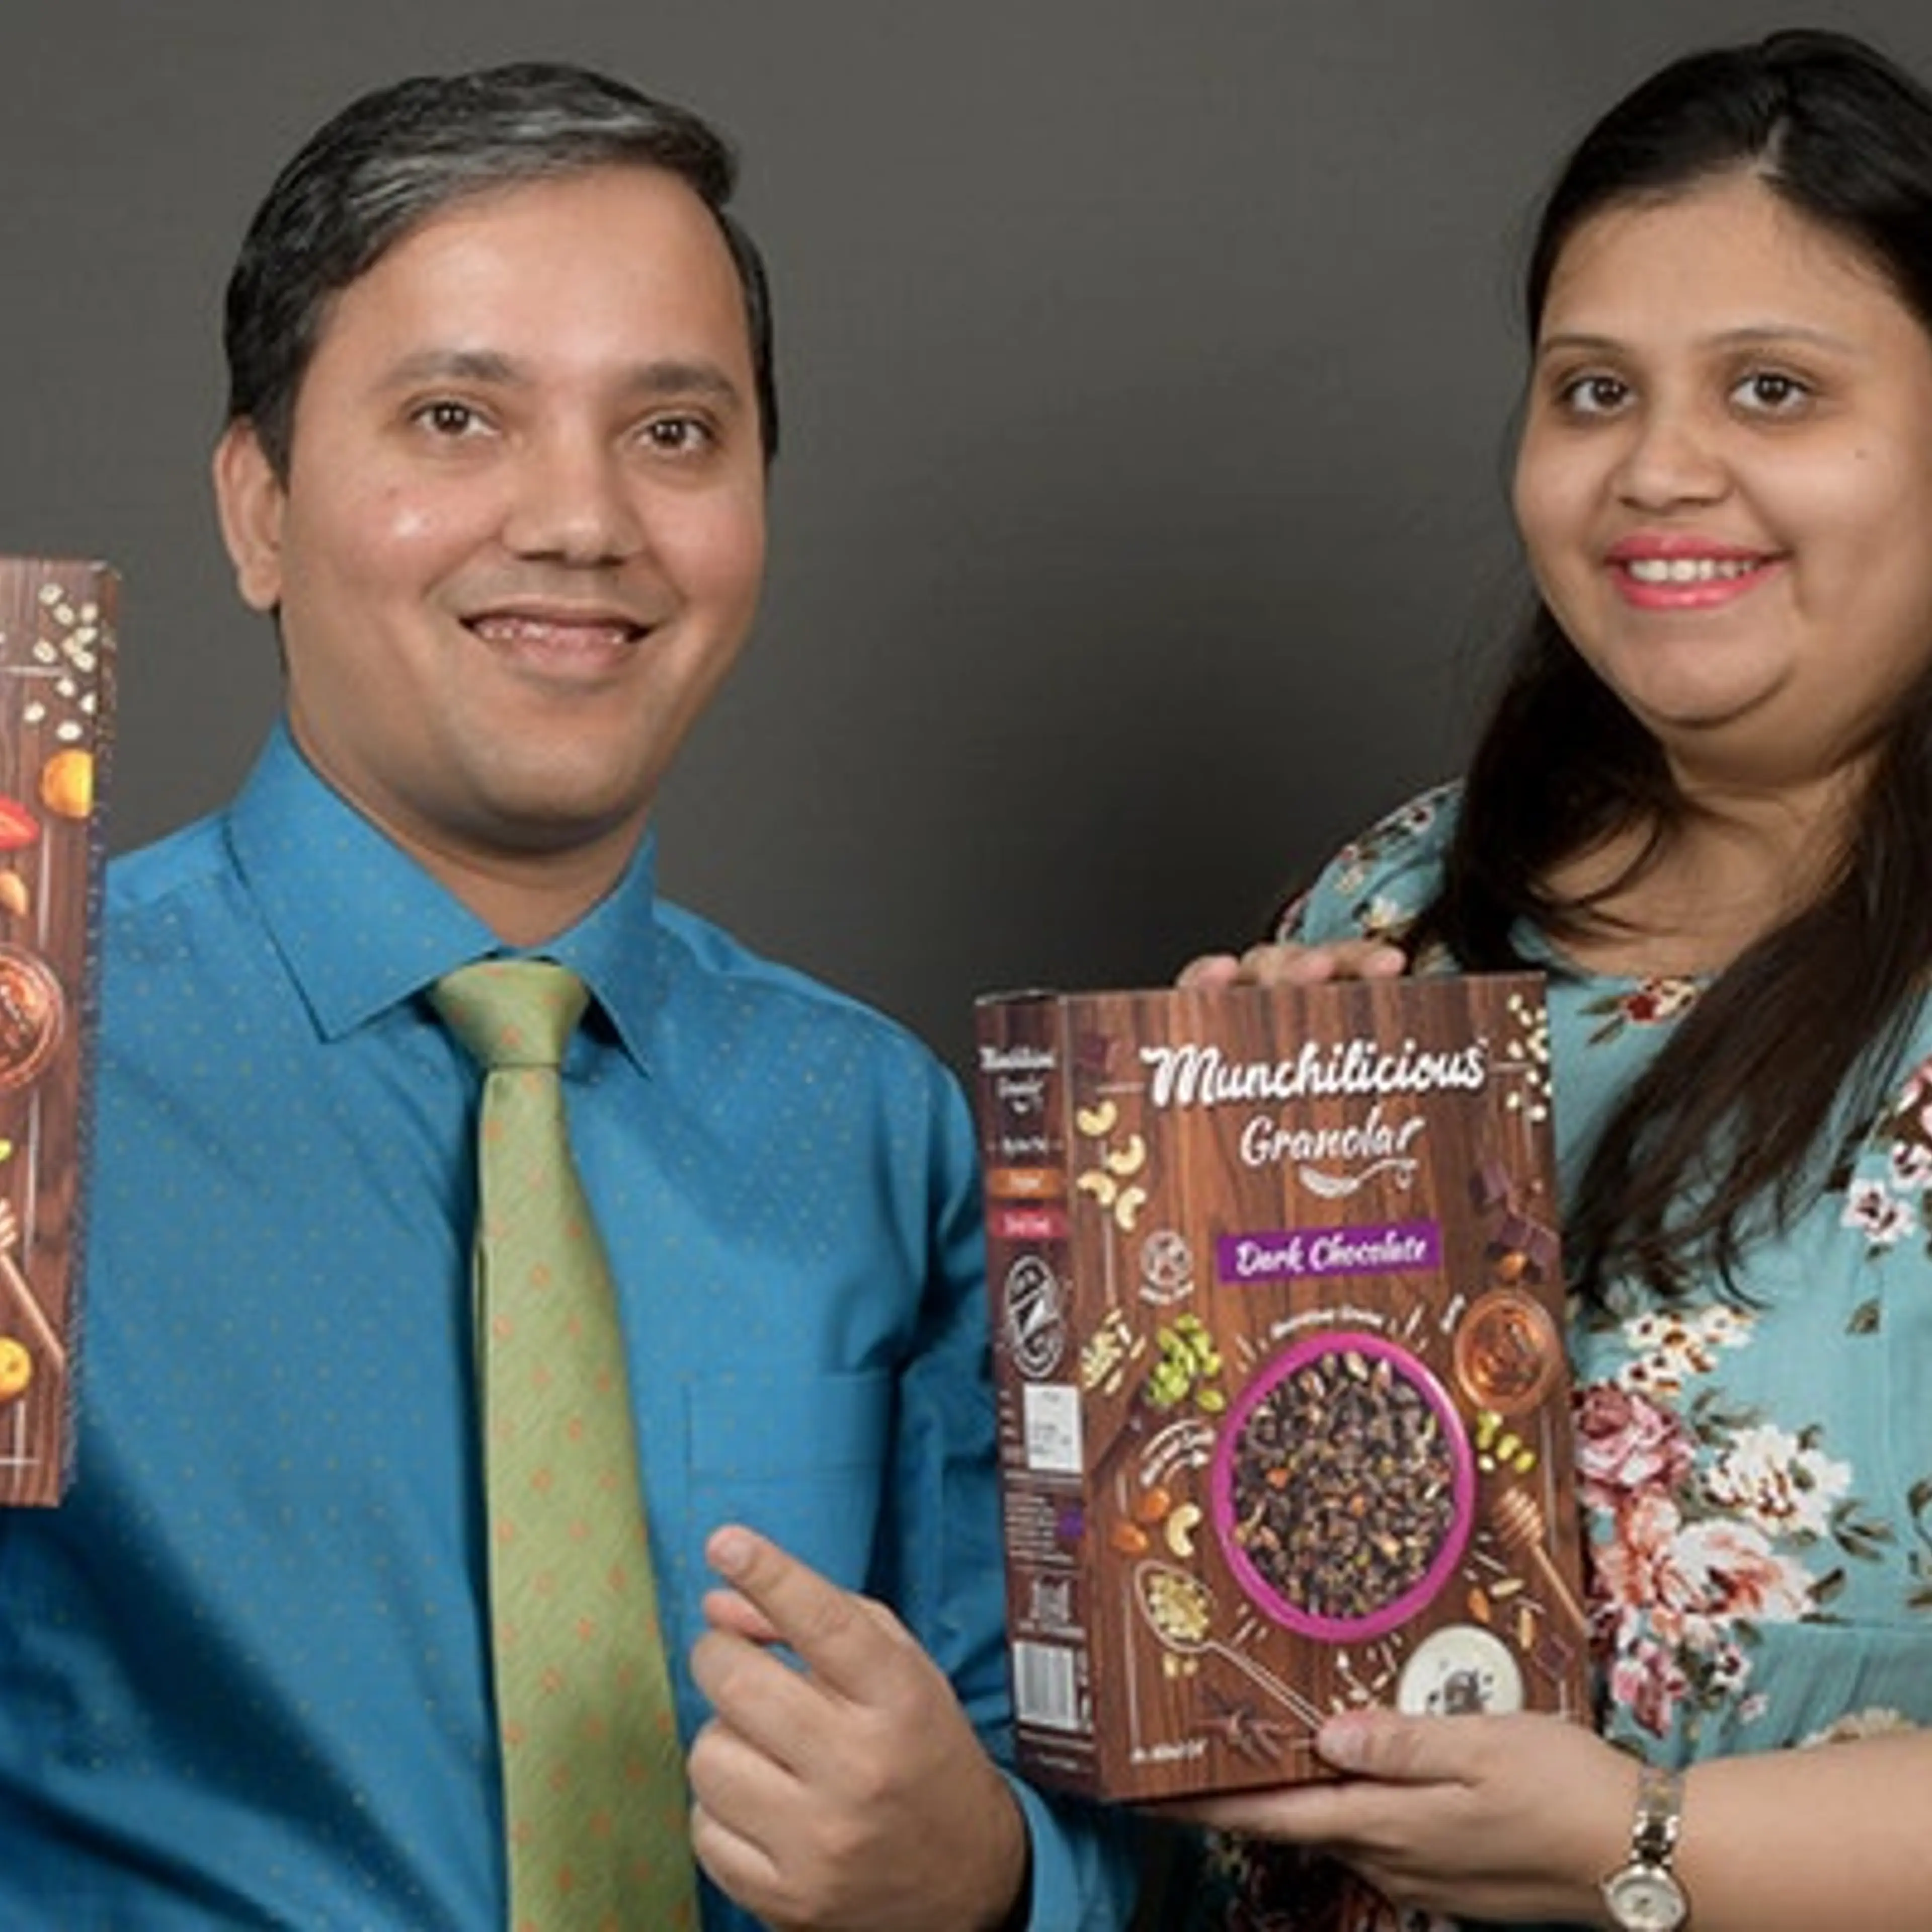 A couple’s kitchen experiment leads to Munchilicious, a snack brand available across 200 stores